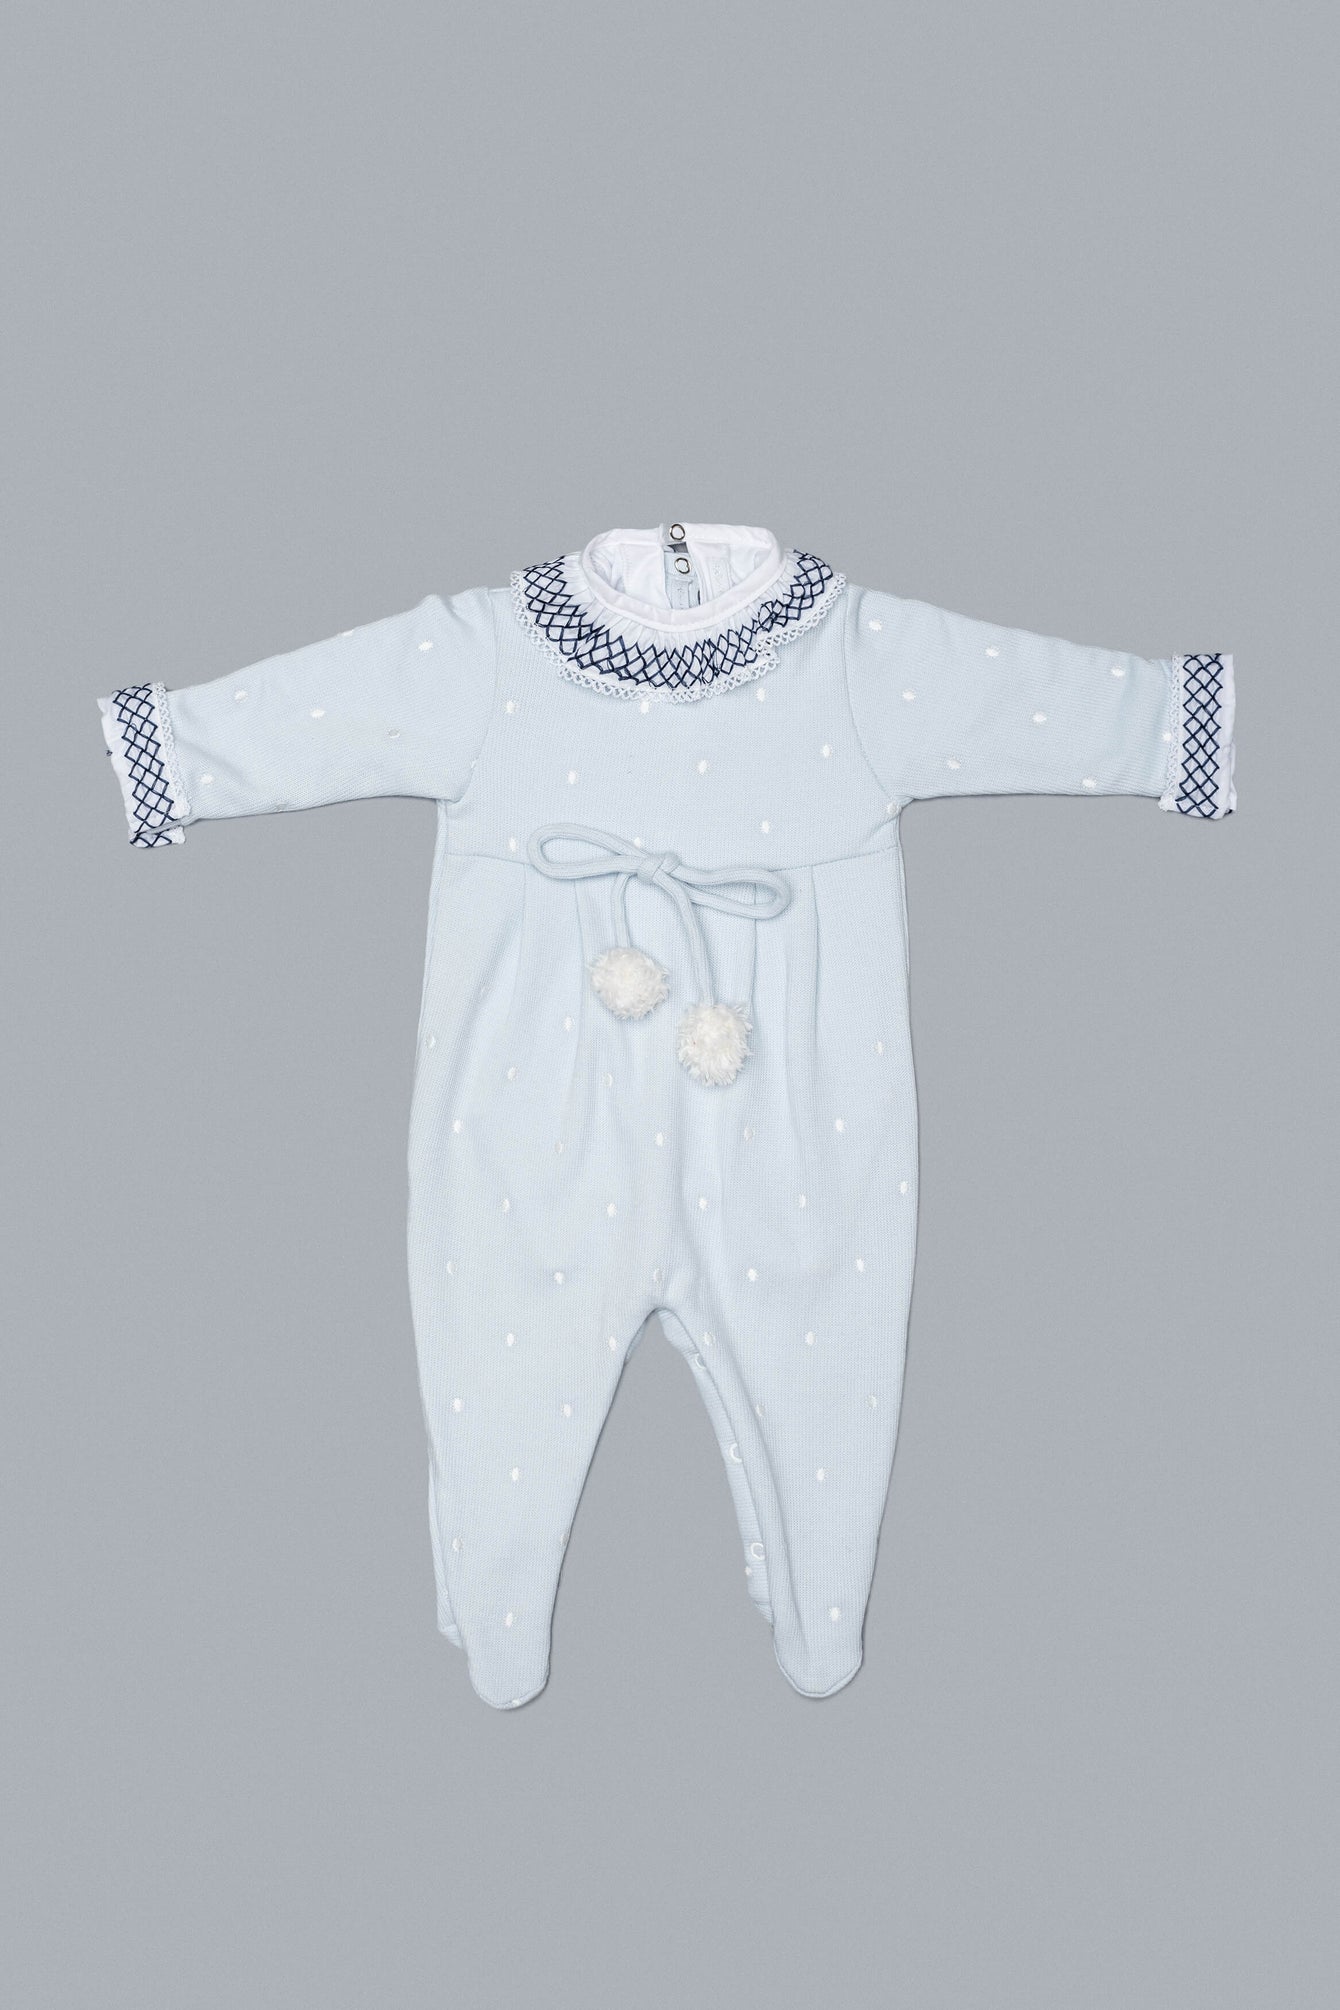 Blue and Navy Babygrow Set for Girls